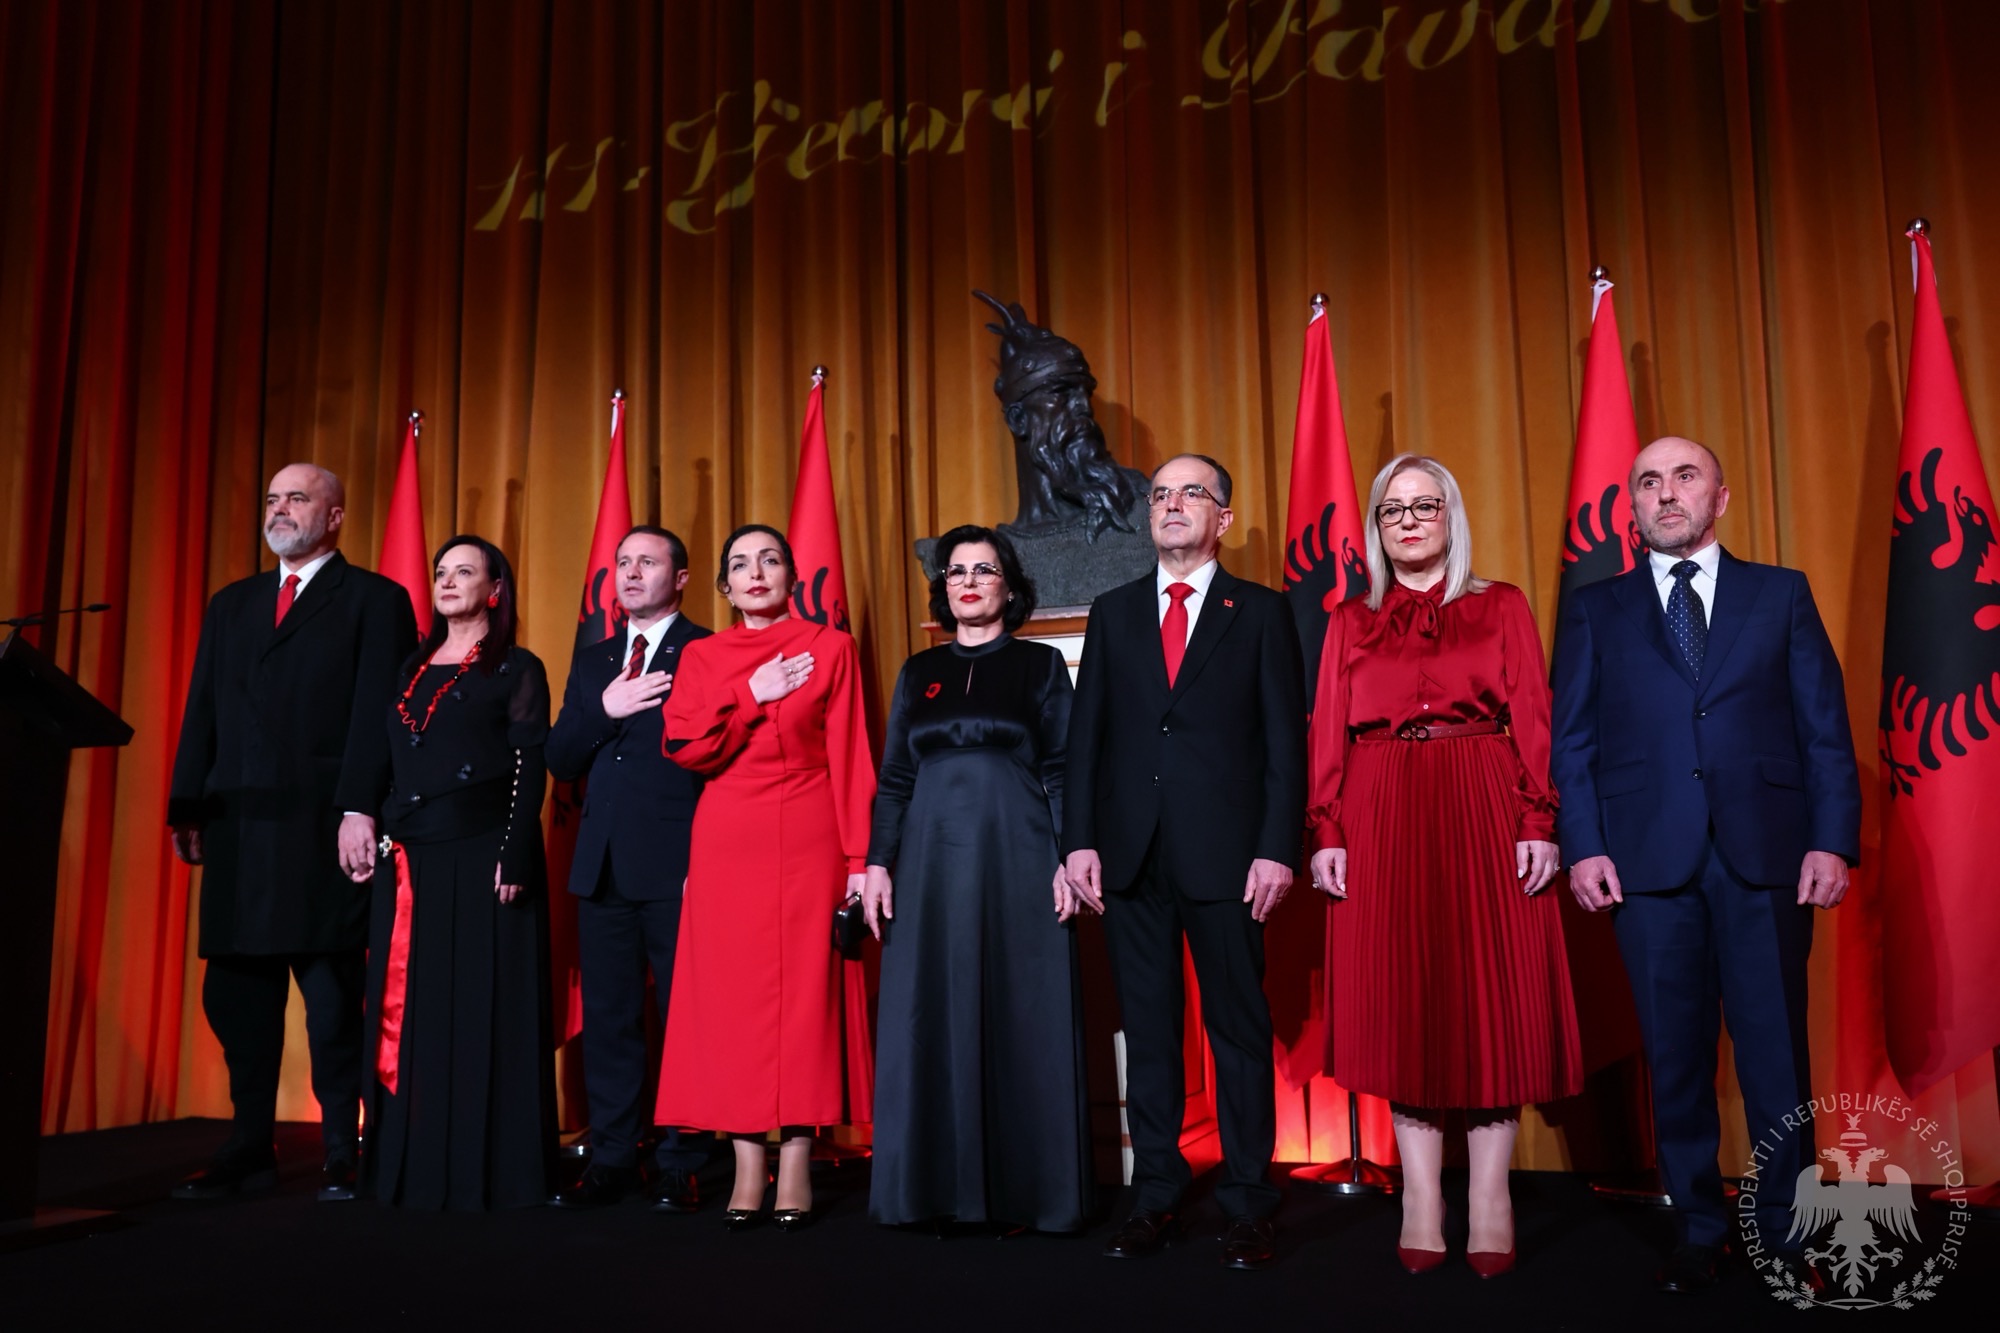 Reception on the occasion of the 111th Anniversary of Albania’s Independence